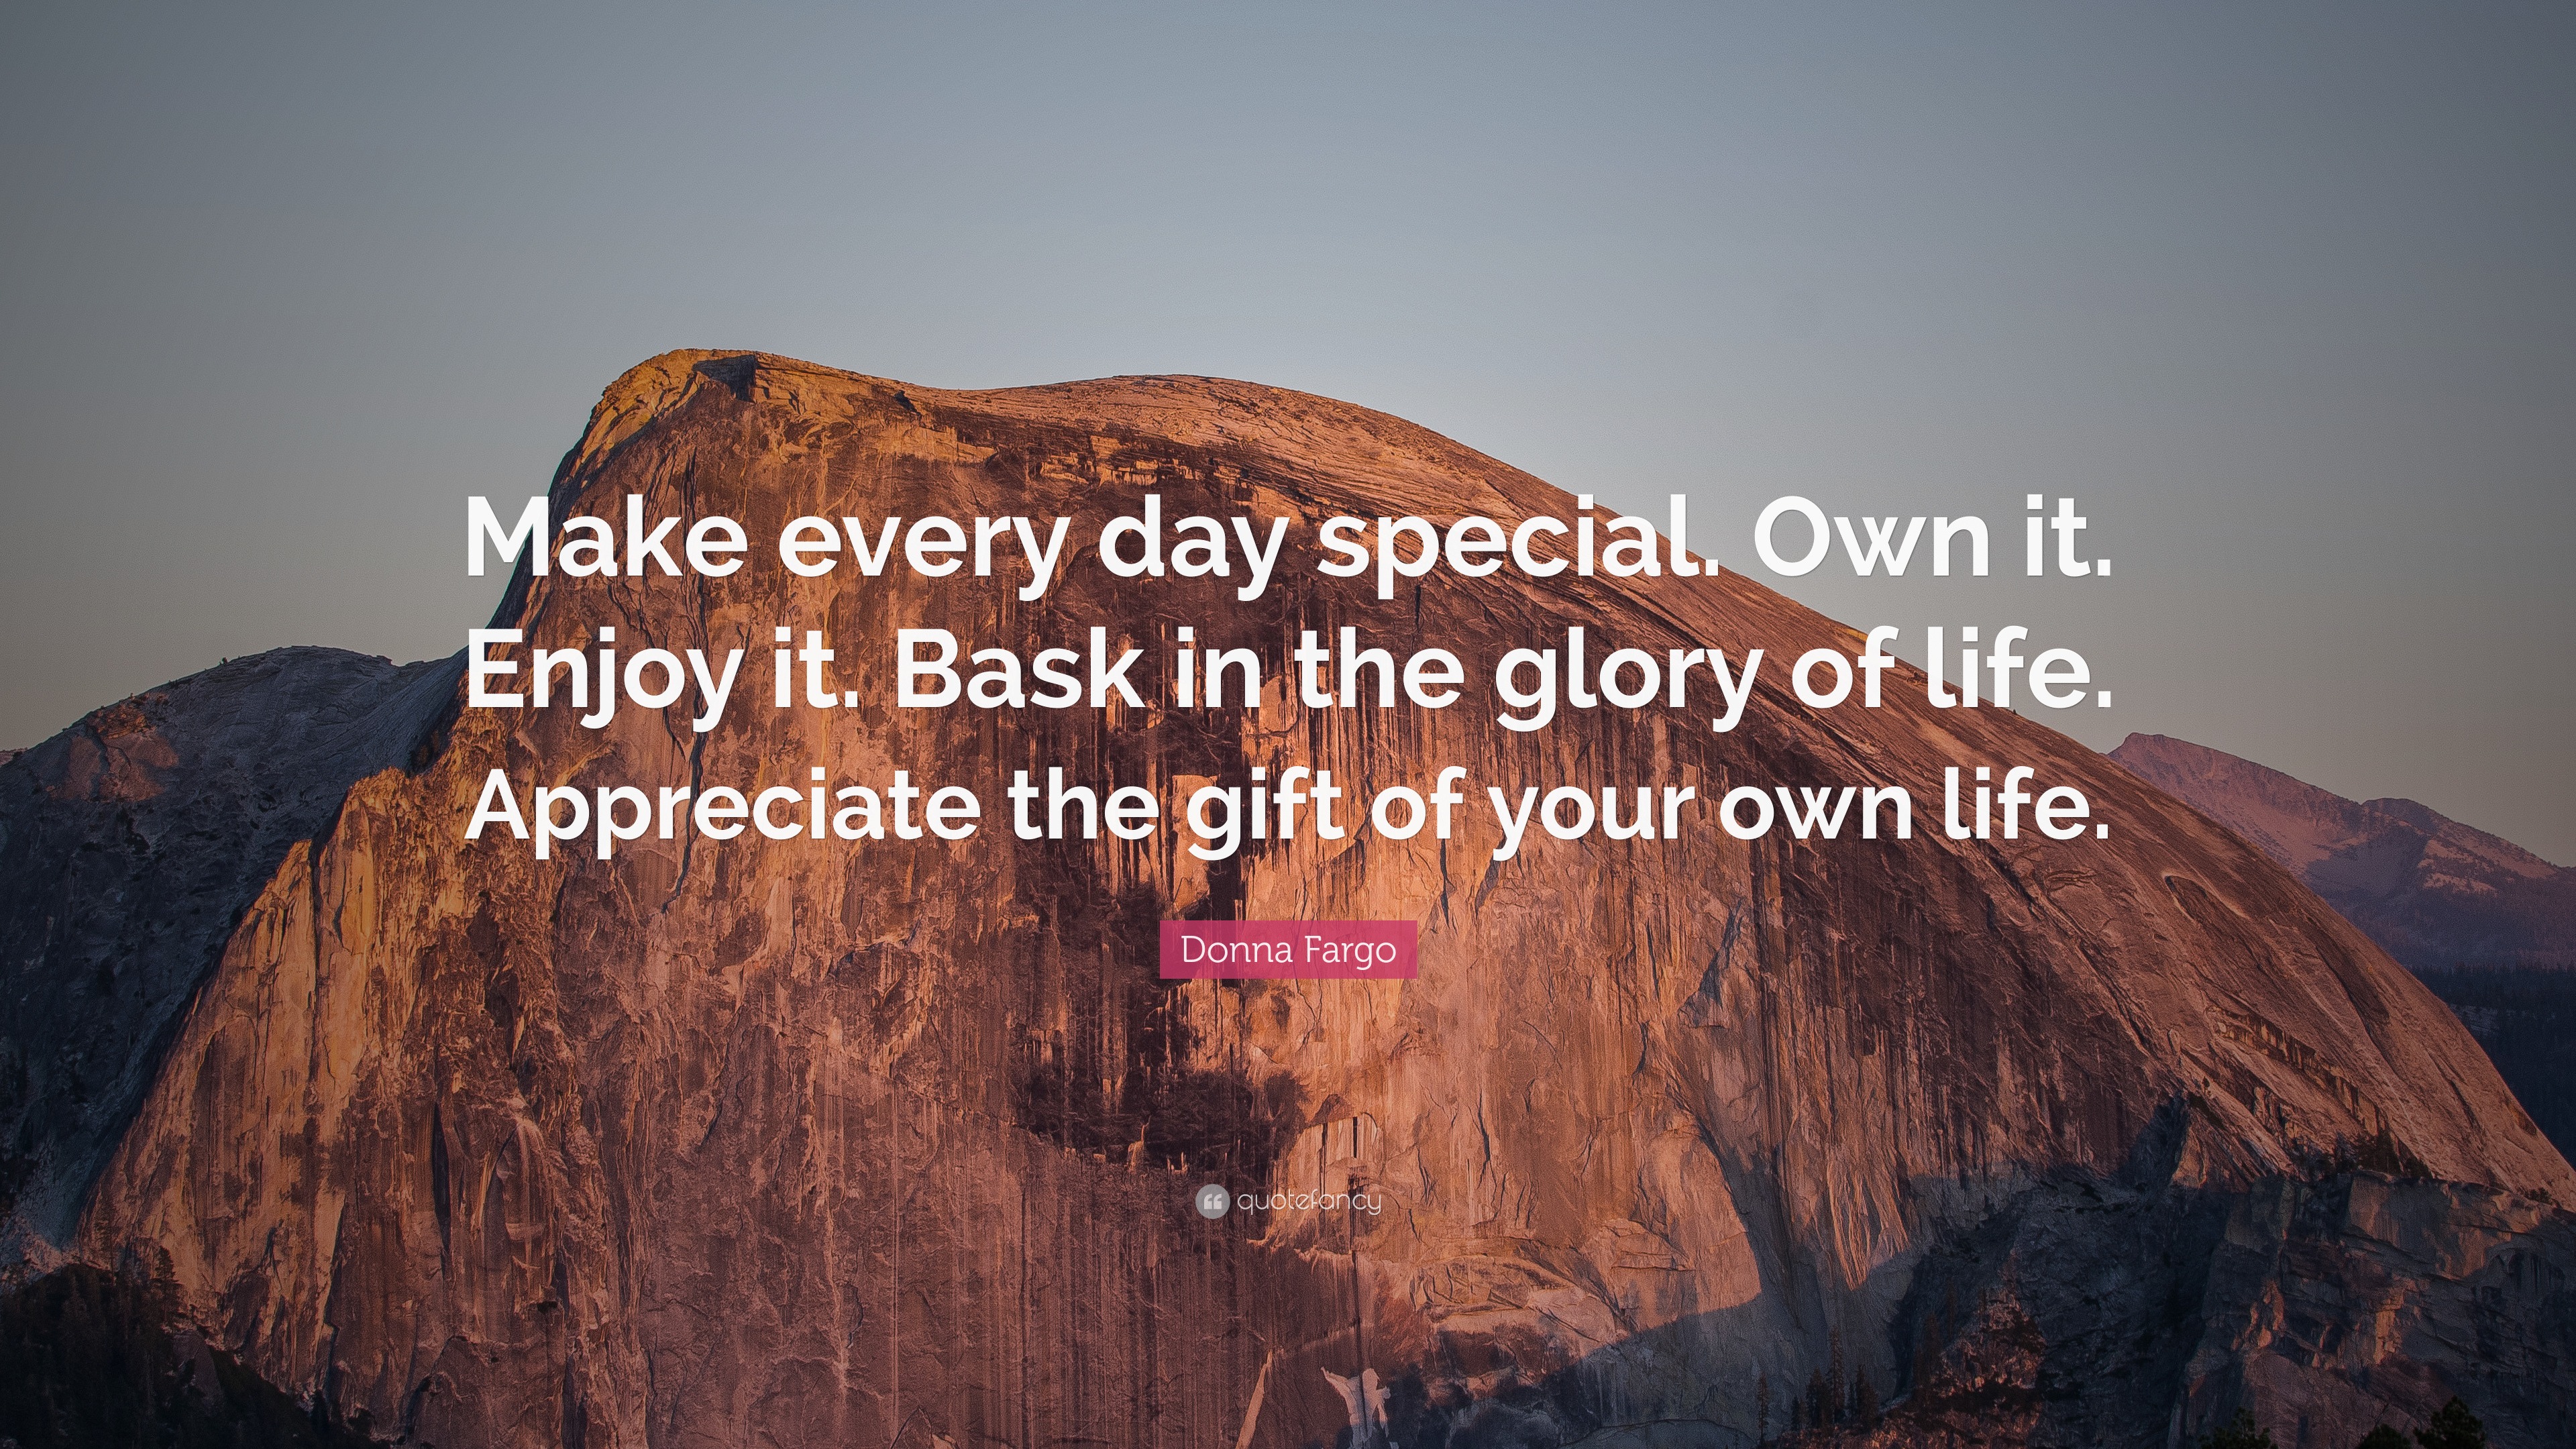 Donna Fargo Quote “Make every day special Own it Enjoy it